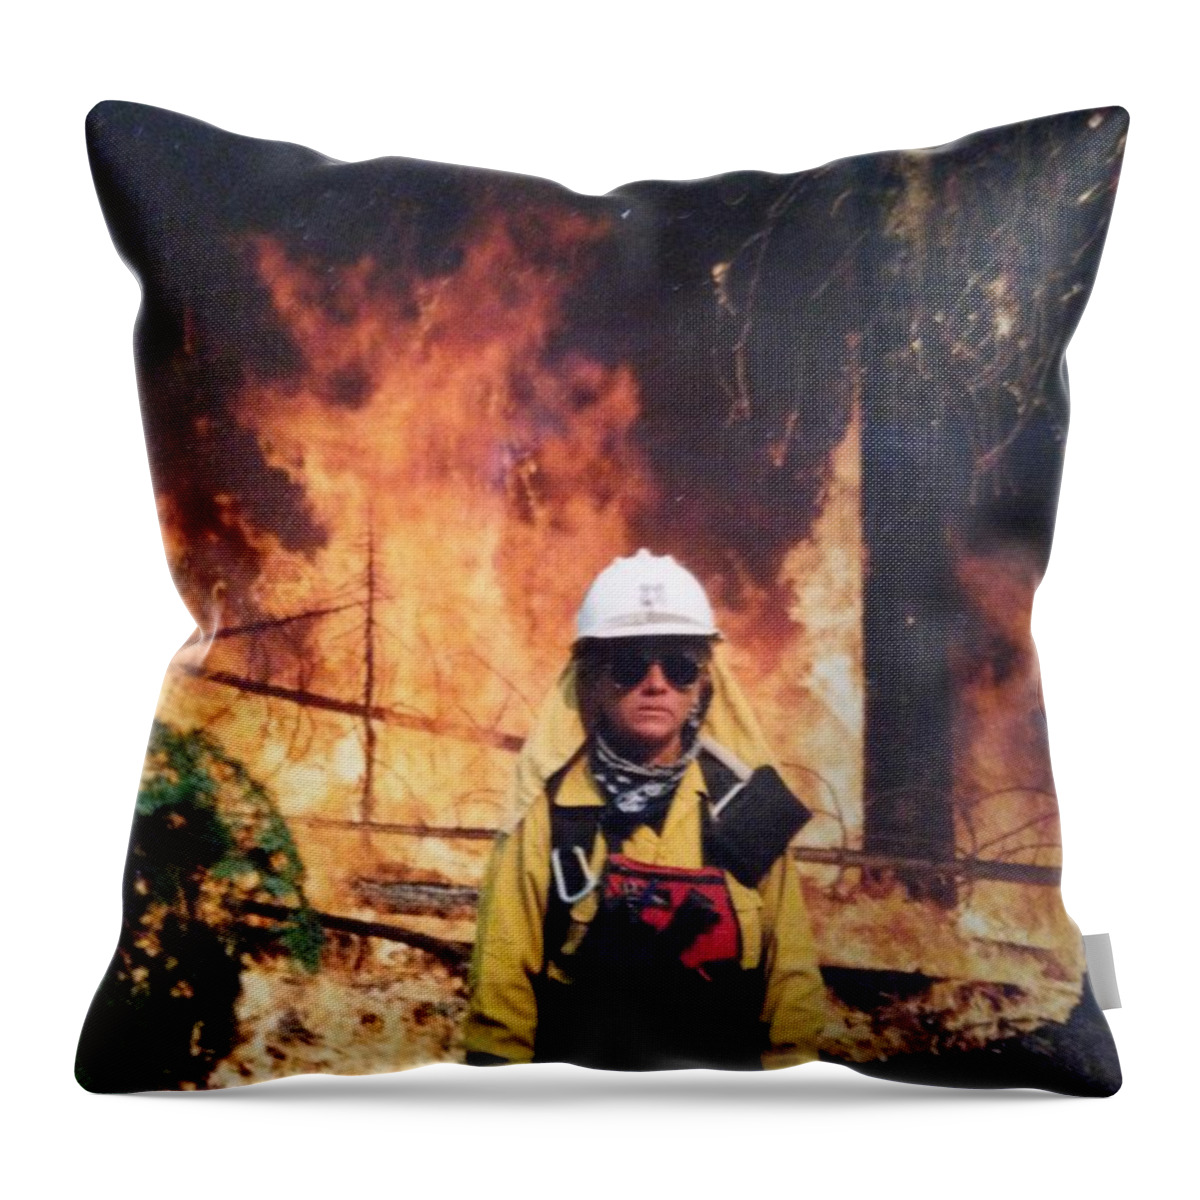 Fire Throw Pillow featuring the photograph Strike Team Leader by Erika Jean Chamberlin